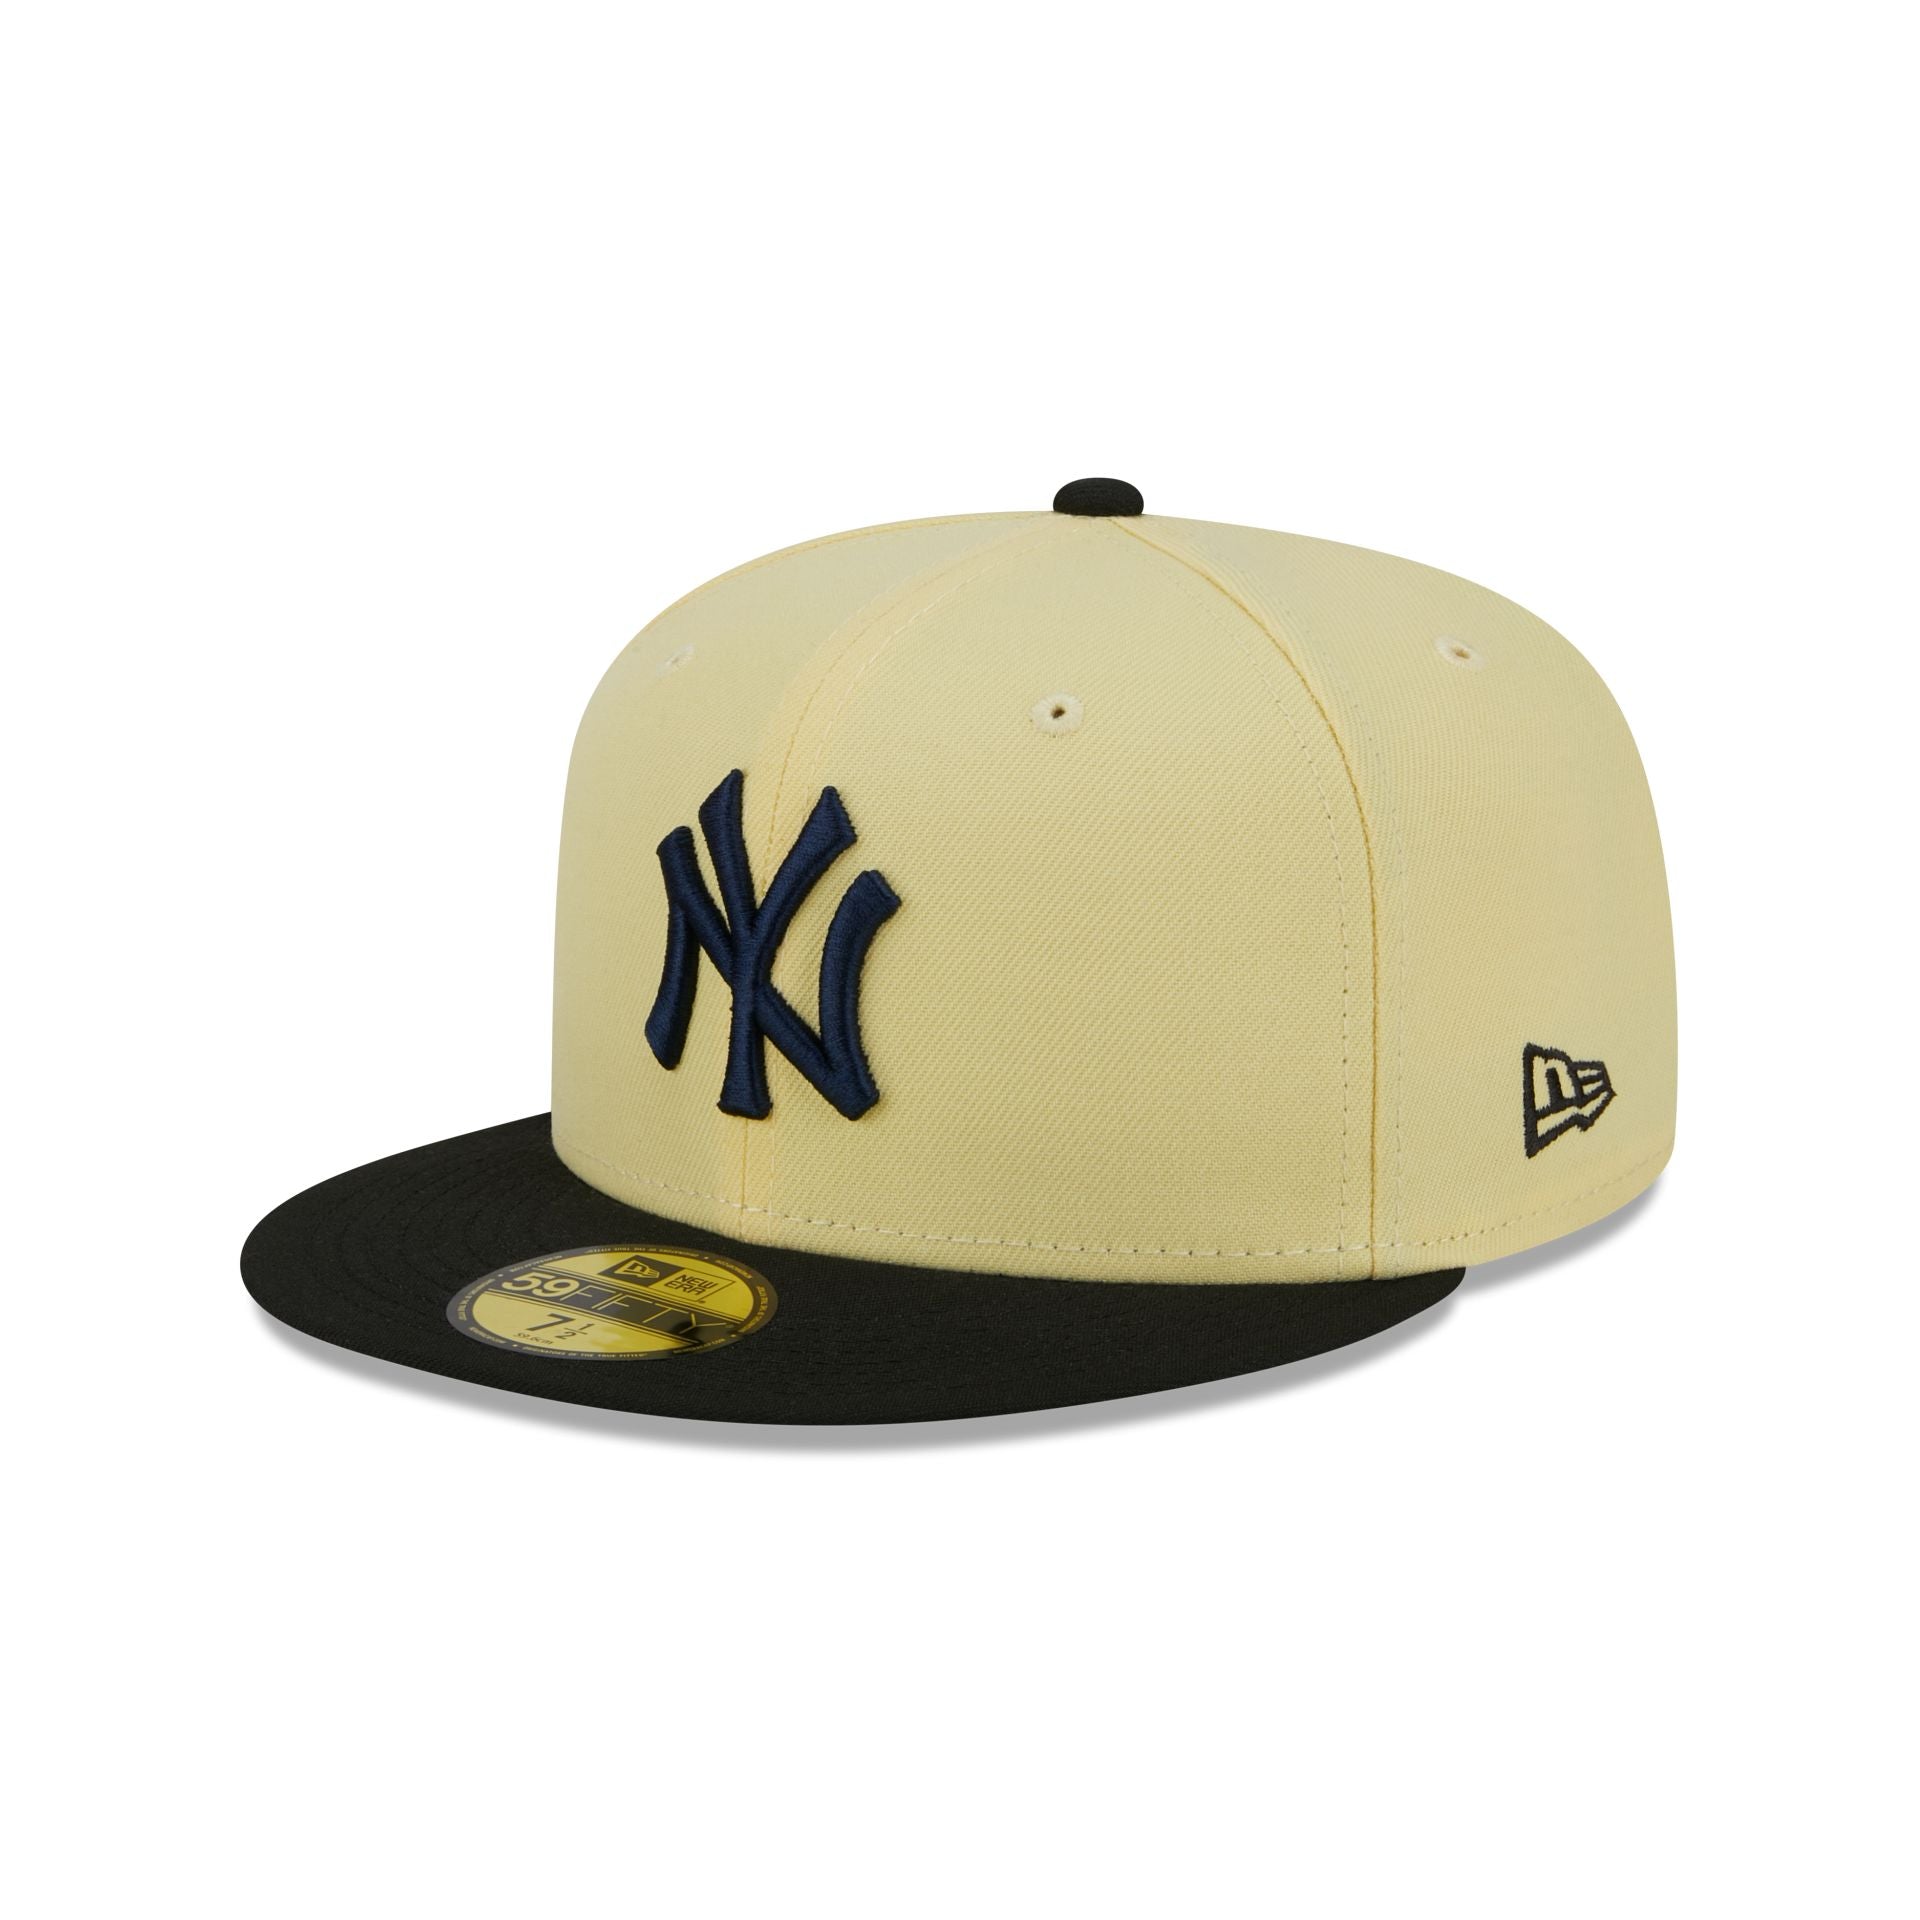 New Era 59FIFTY MLB New York Yankees Mother's Day Fitted Hat 8